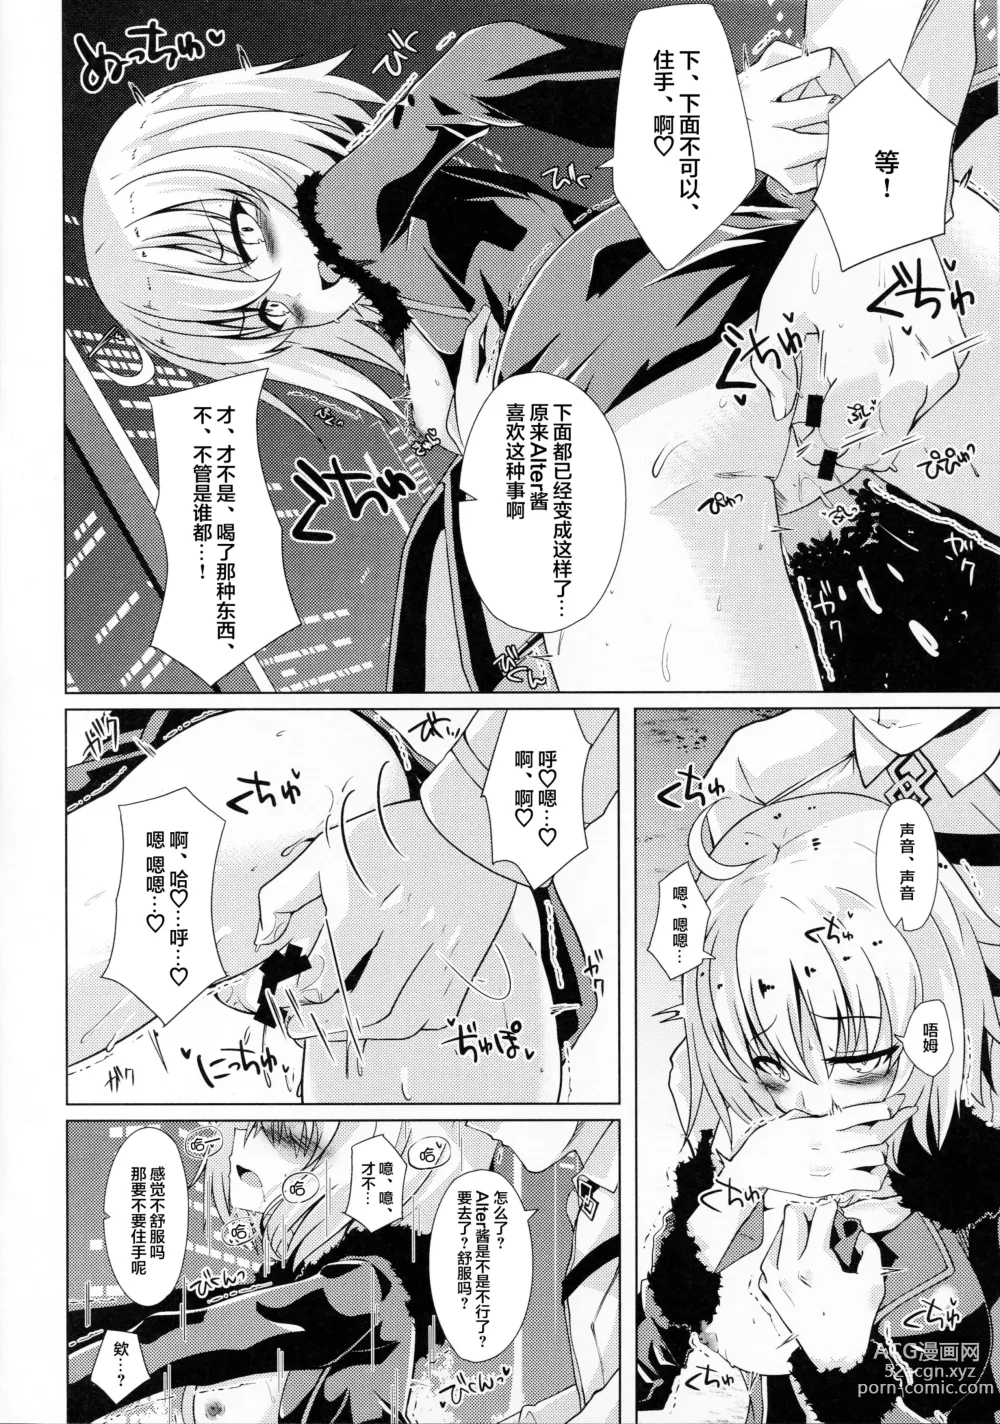 Page 5 of doujinshi Alter酱和爱之灵药和自我束缚卷轴